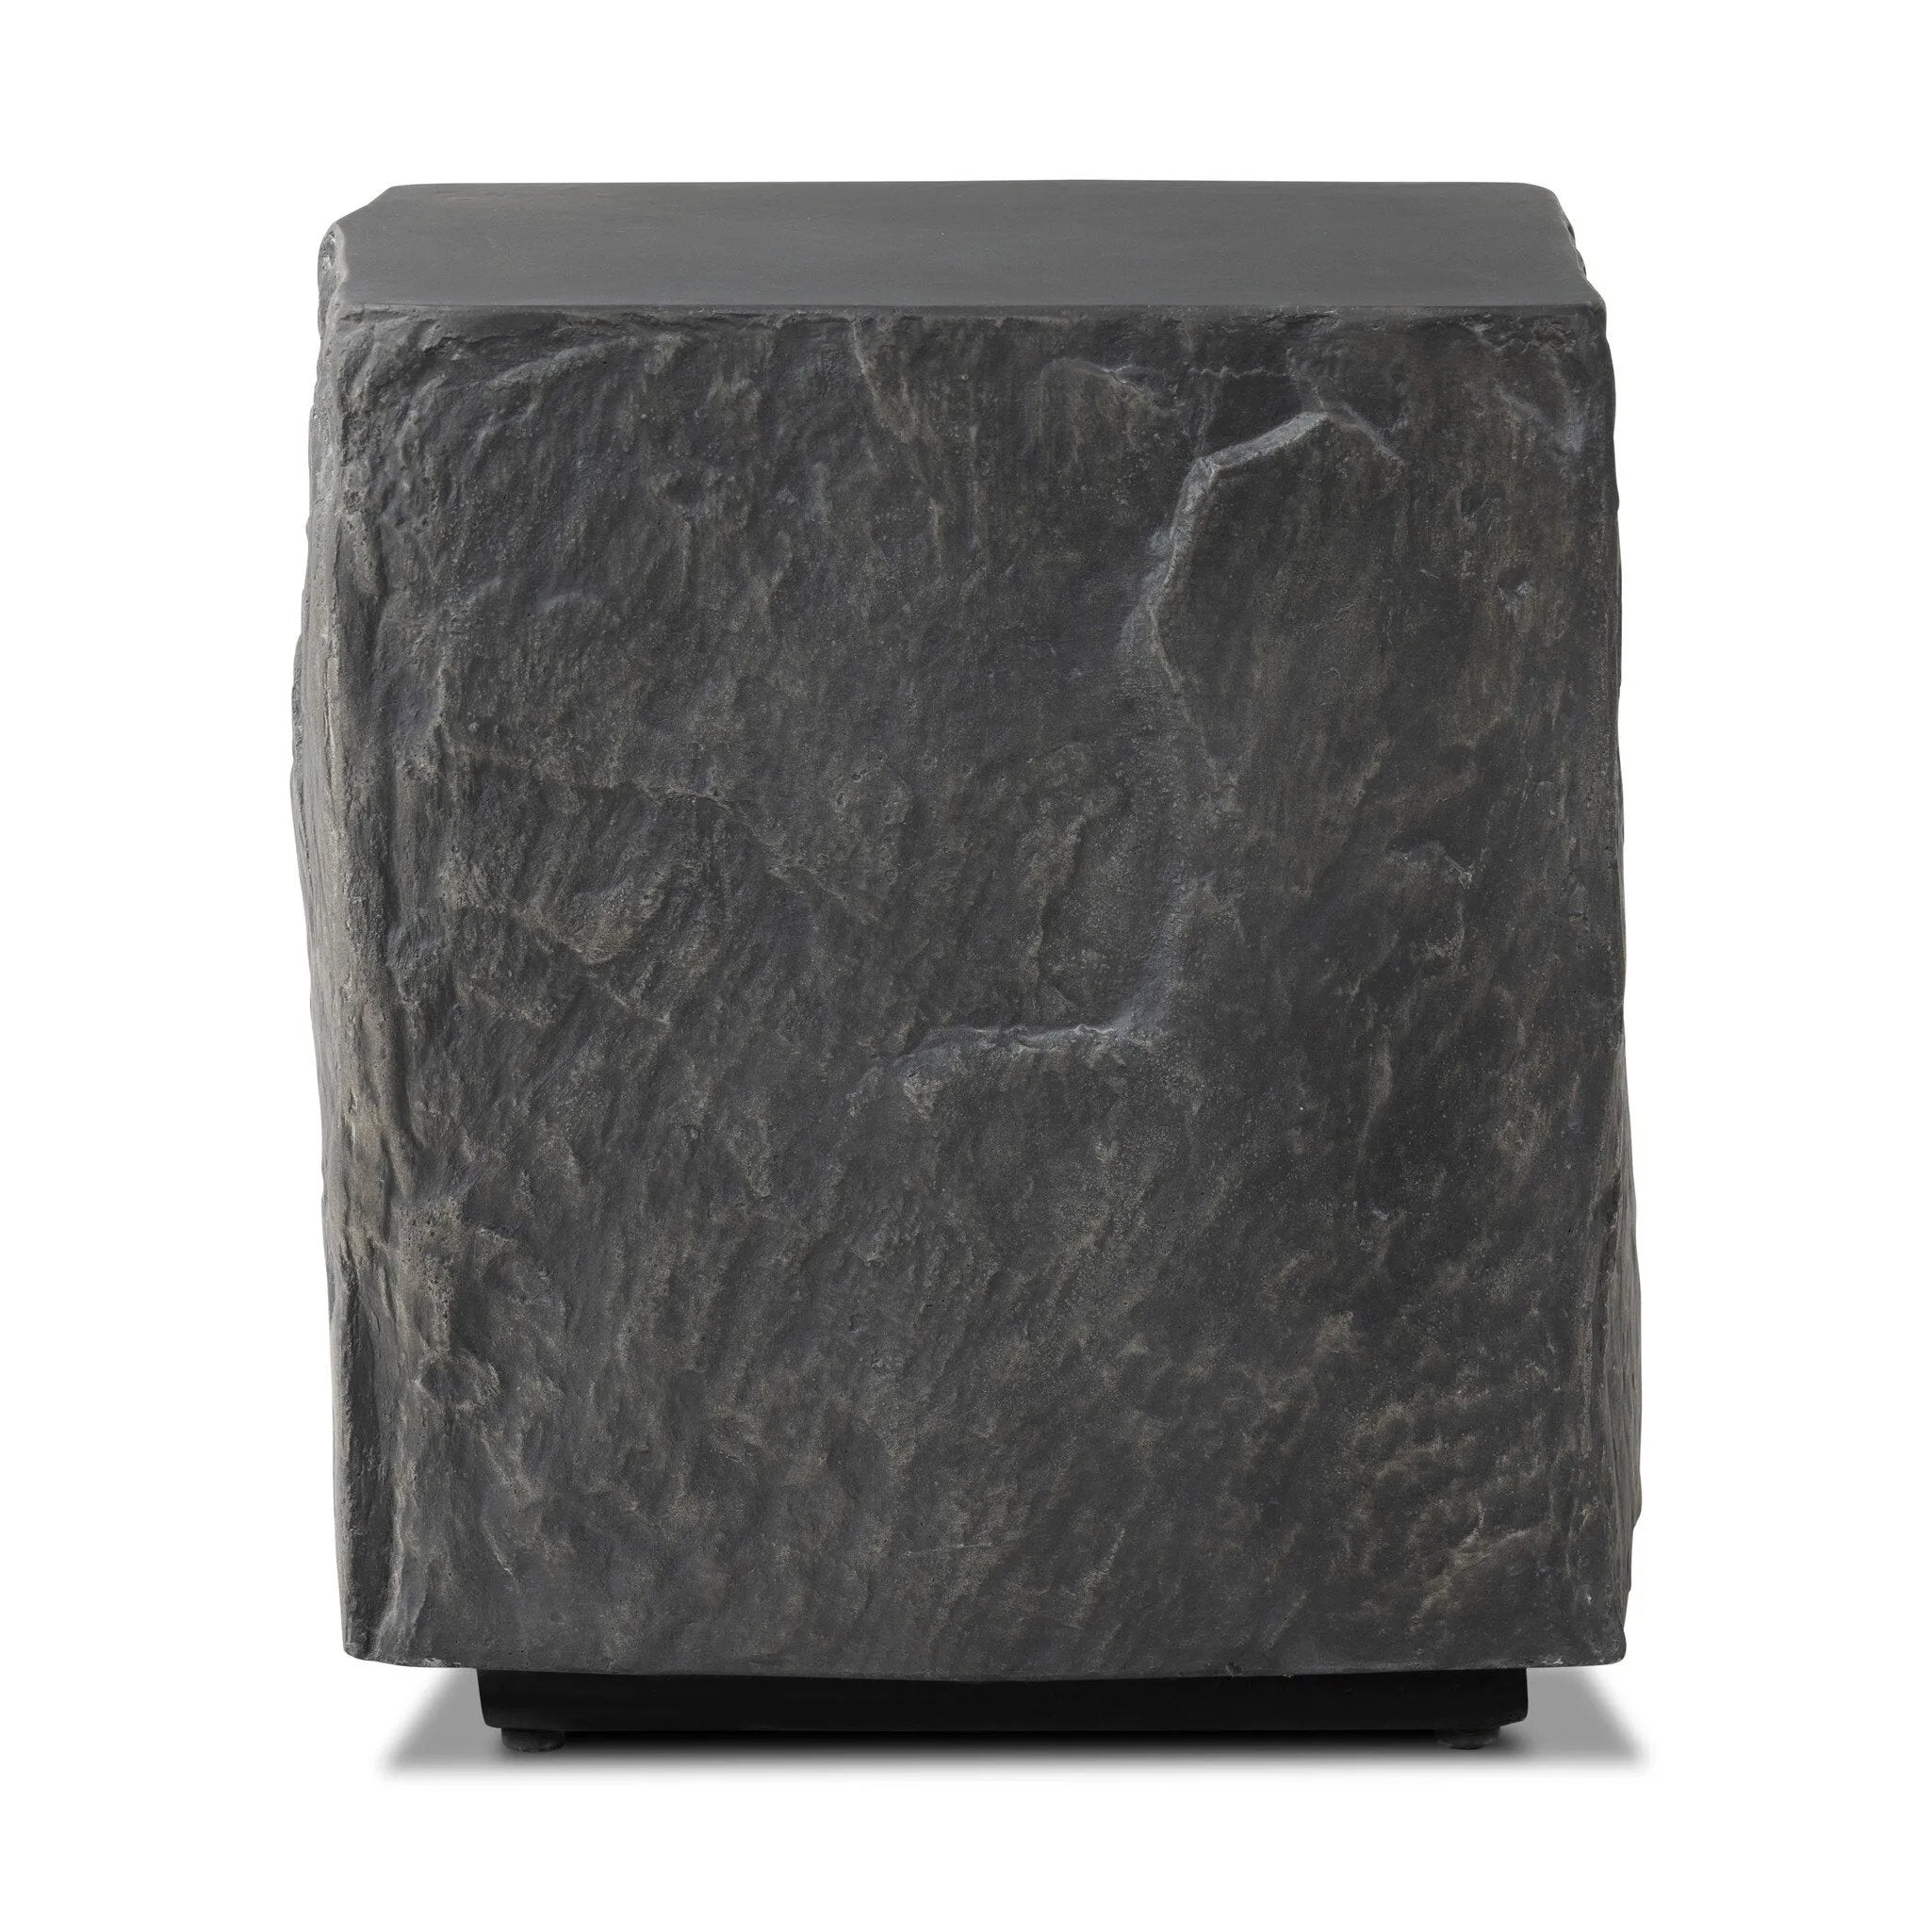 Cast black concrete features heavily textured sides that resemble natural slate, paired with a smoothed tabletop.Collection: Chandle Amethyst Home provides interior design, new home construction design consulting, vintage area rugs, and lighting in the Nashville metro area.